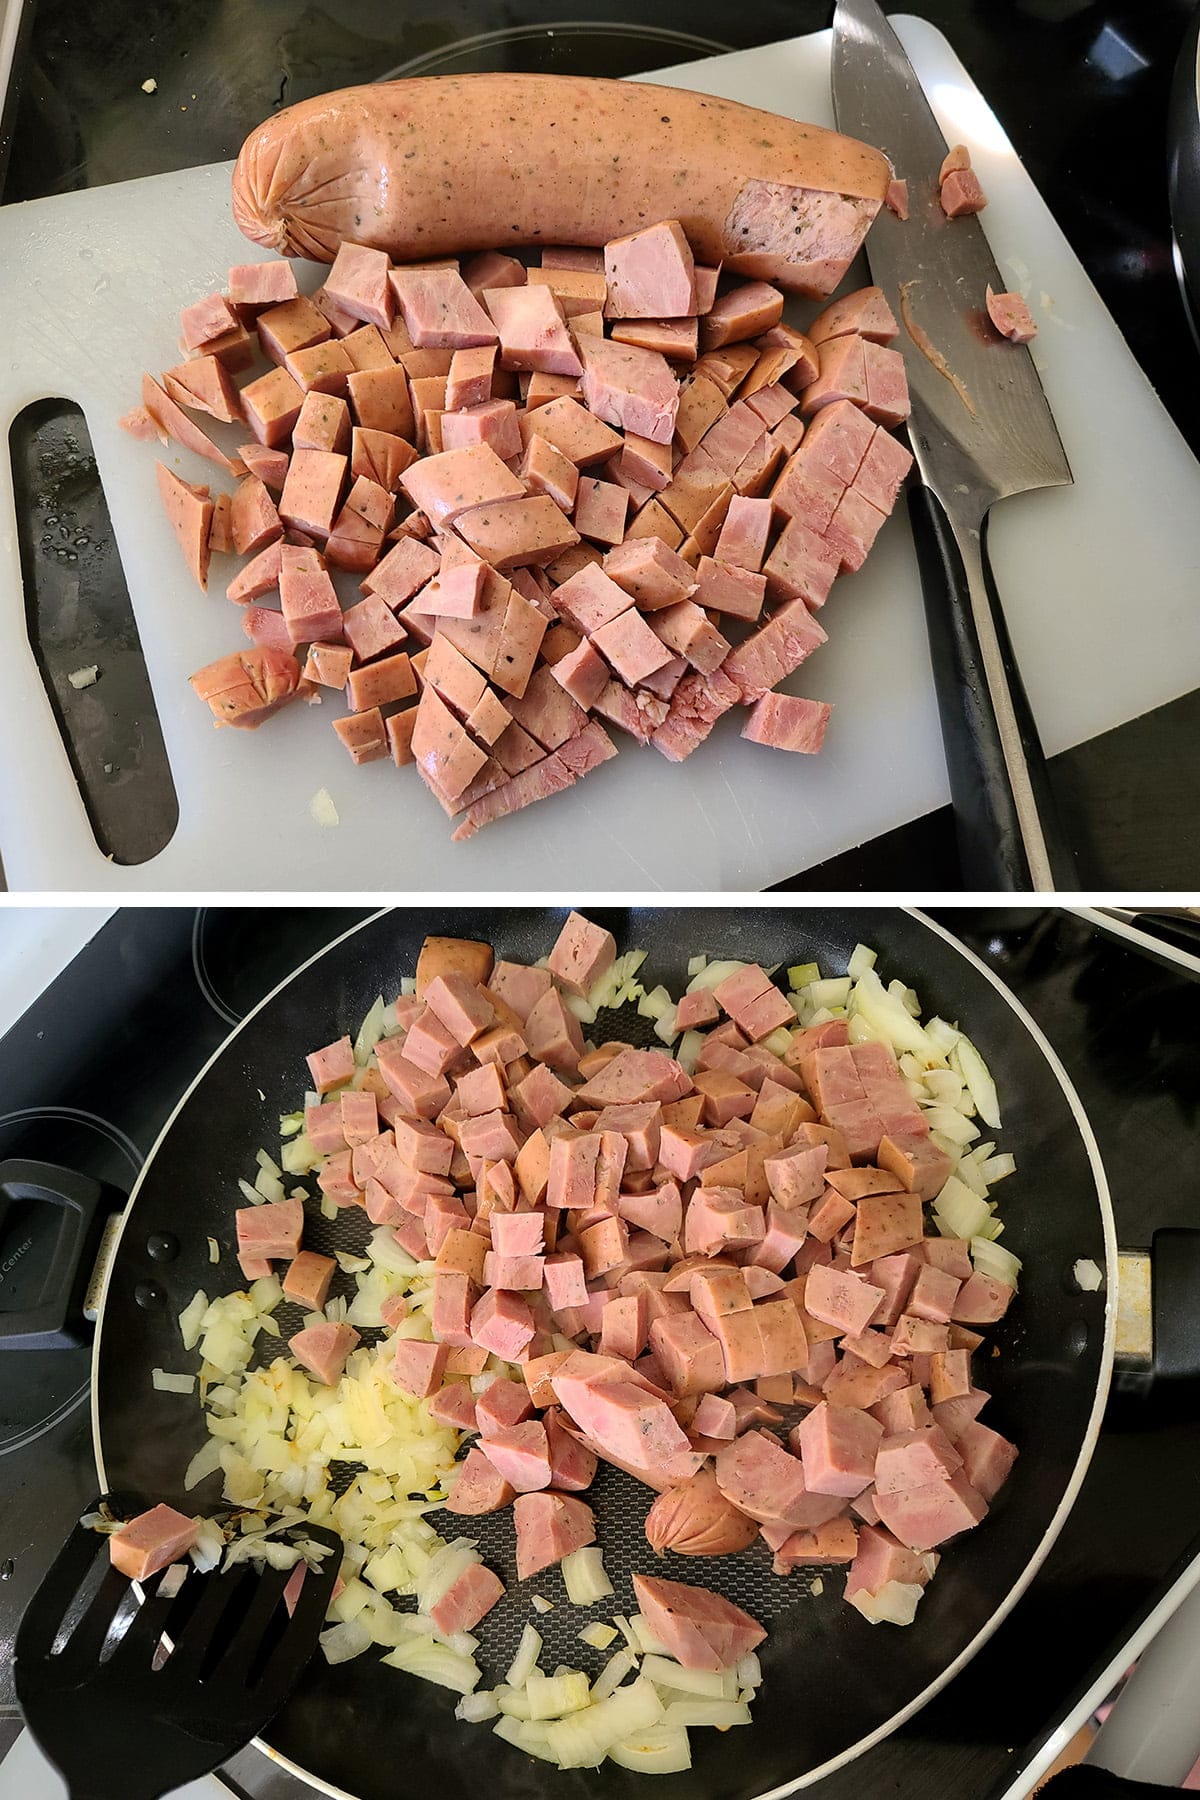 A two part compilation image showing turkey kielbasa - in place of ham - being chopped and added to a pan of onions and garlic.